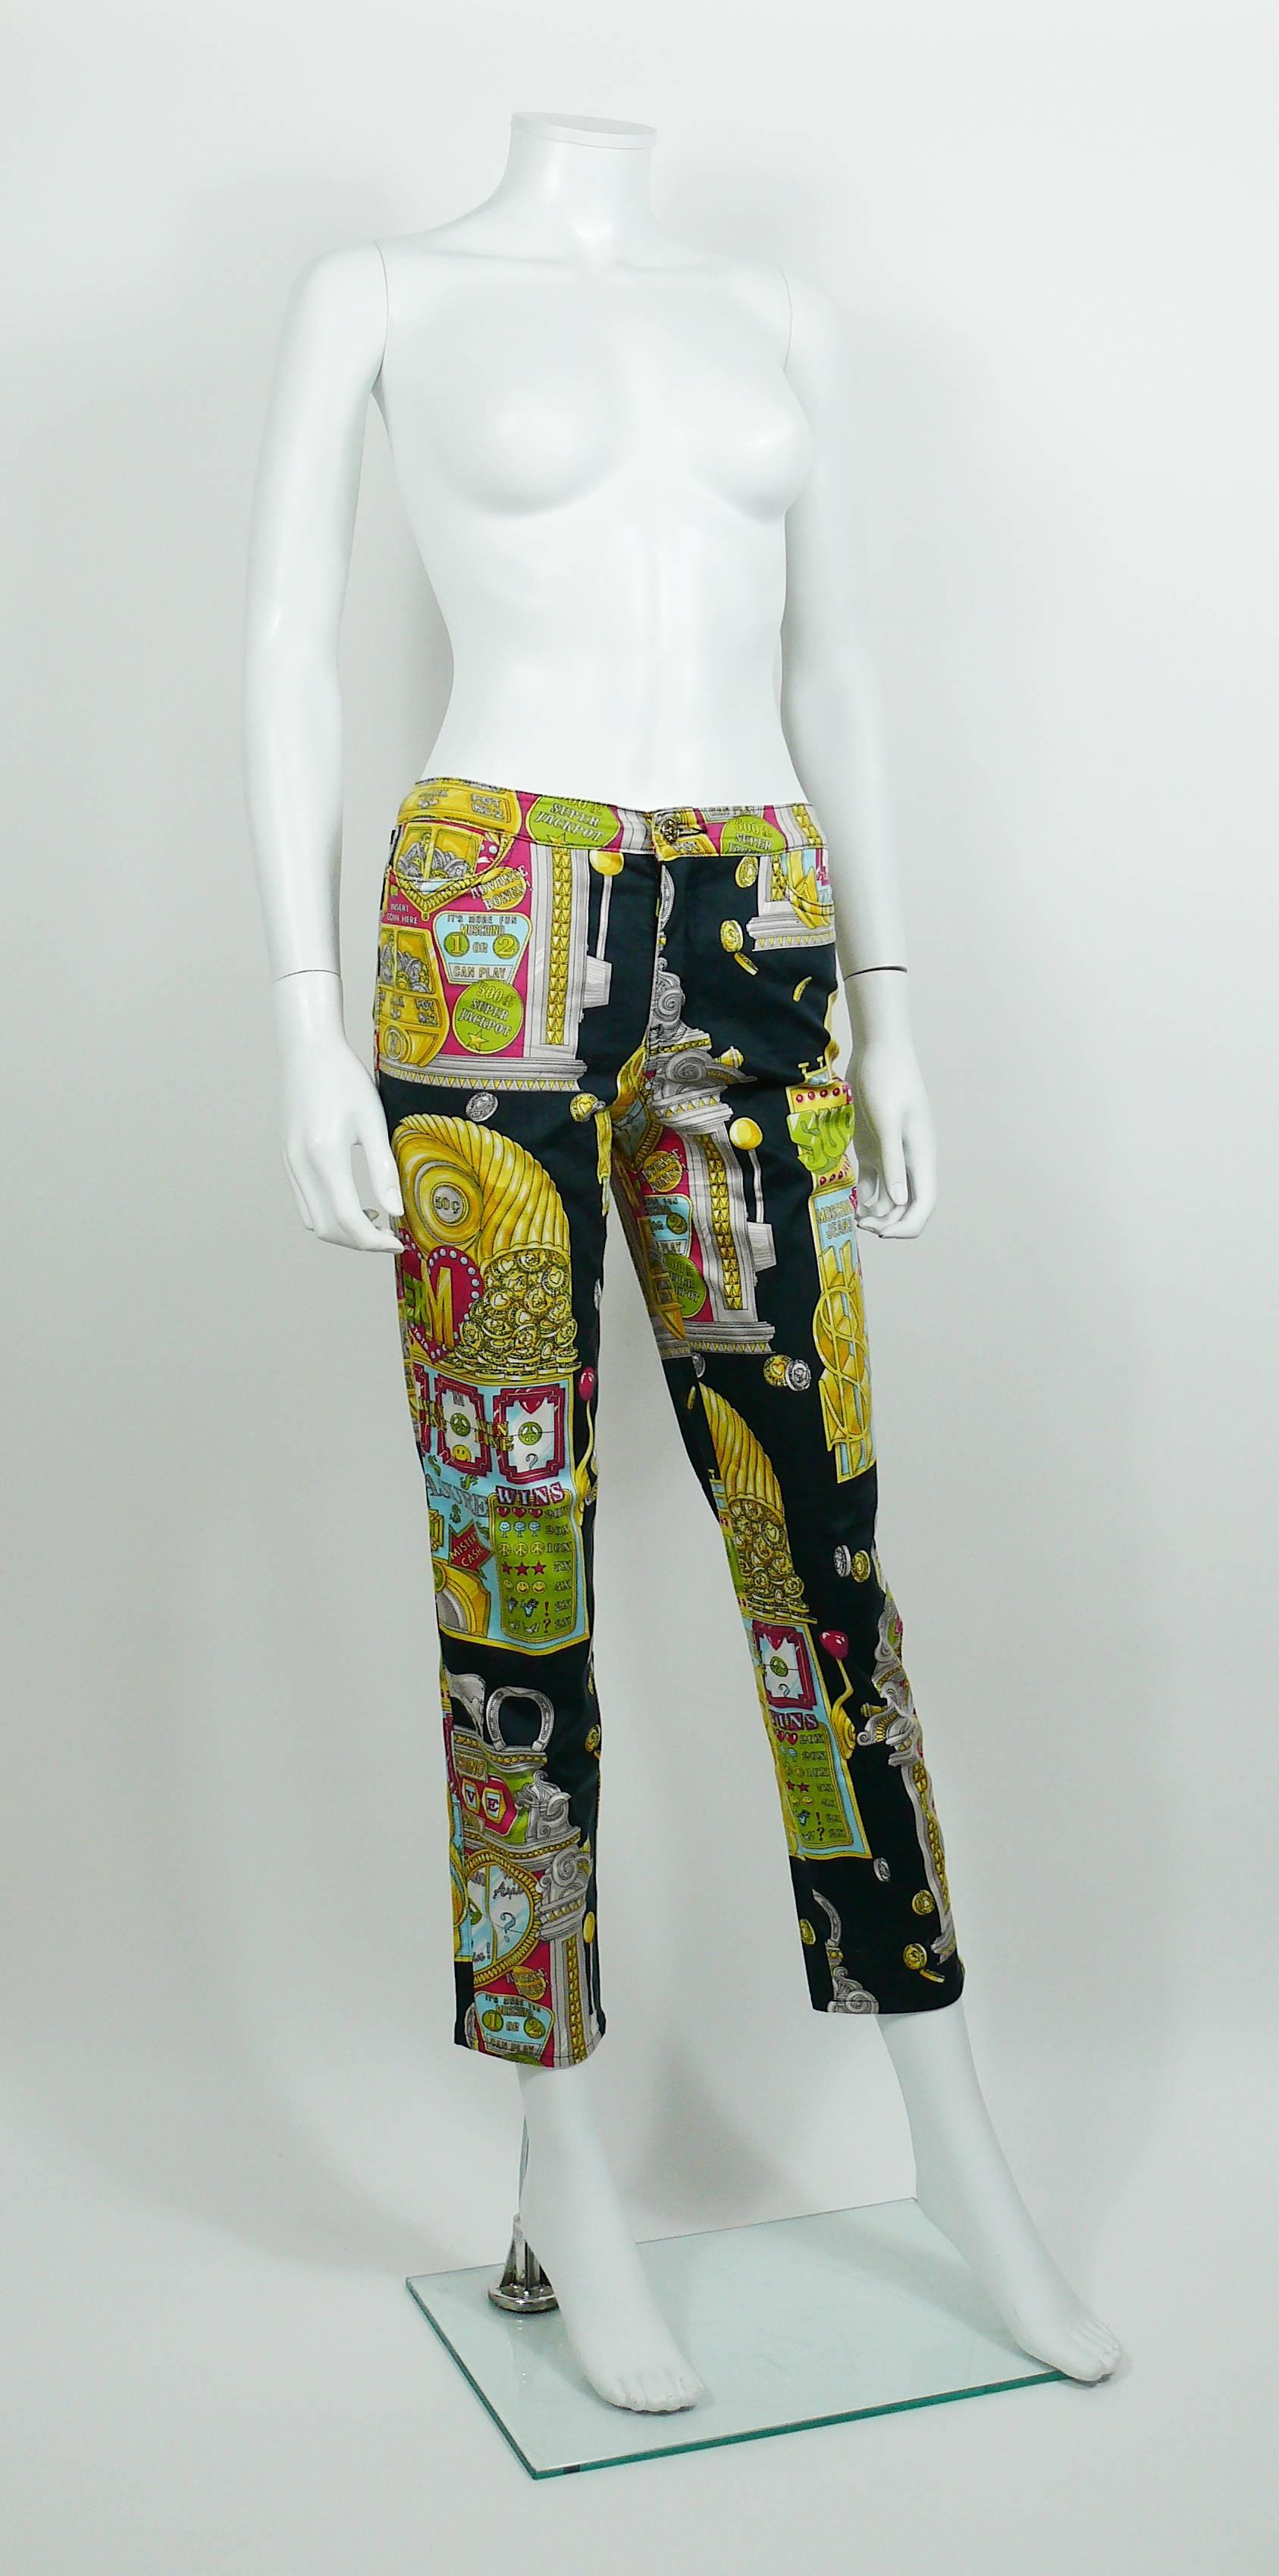 MOSCHINO vintage 1990s trousers featuring an opulent multicolored slot machine print on a black background.

These trousers feature :
- Stretchy material.
- Front buttoning and zip.
- MOSCHINO JEANS signature gold toned button and rivets.
- Four